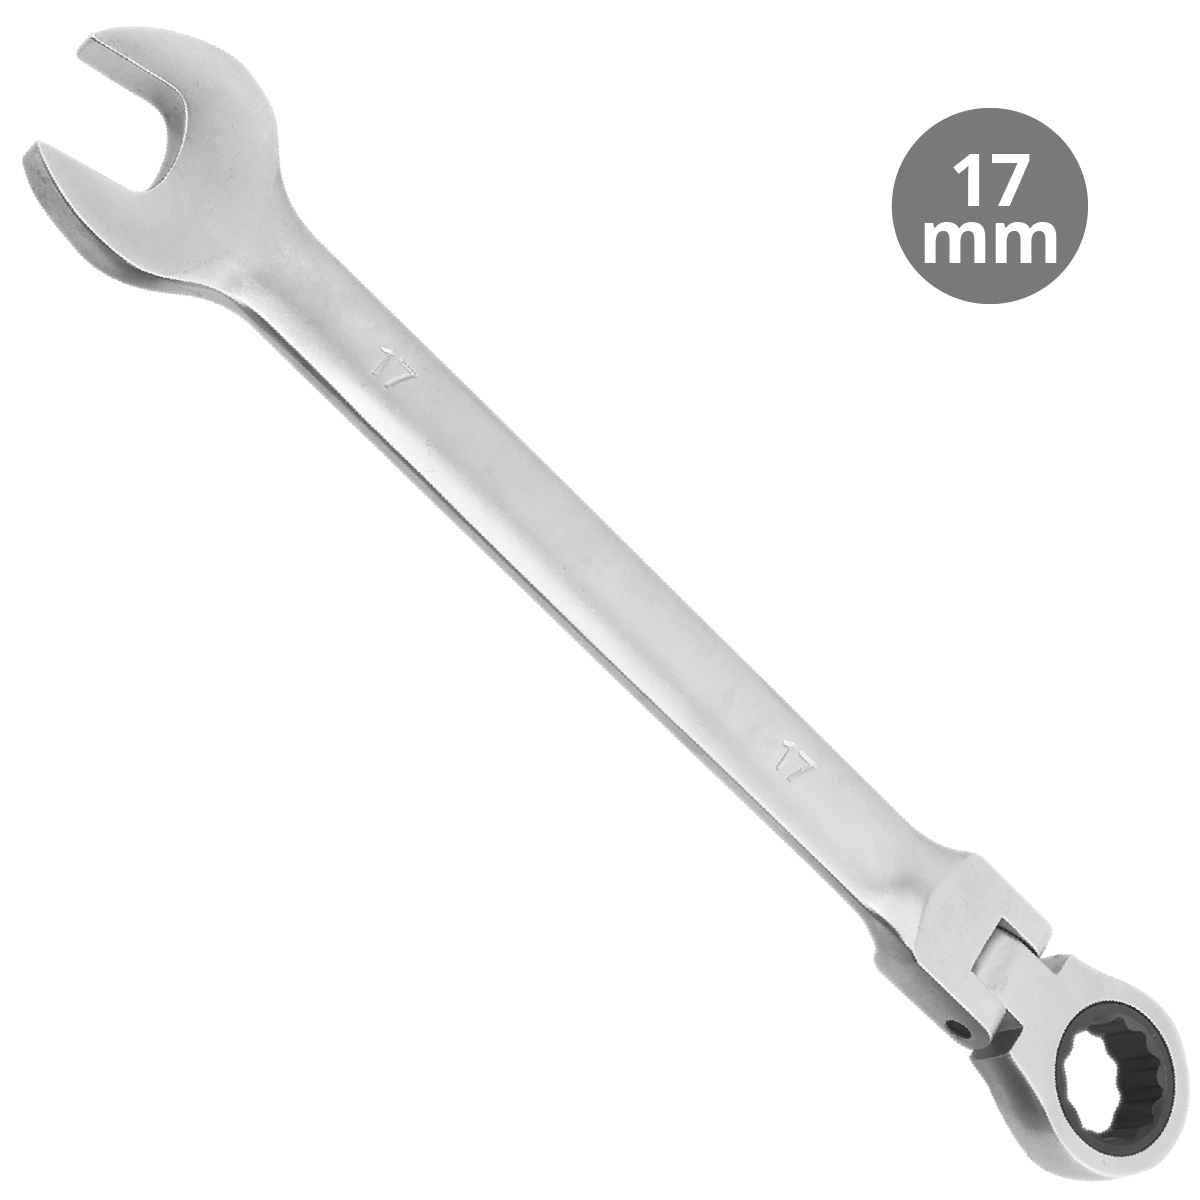 Combination rachet wrenches CR-V 17mm